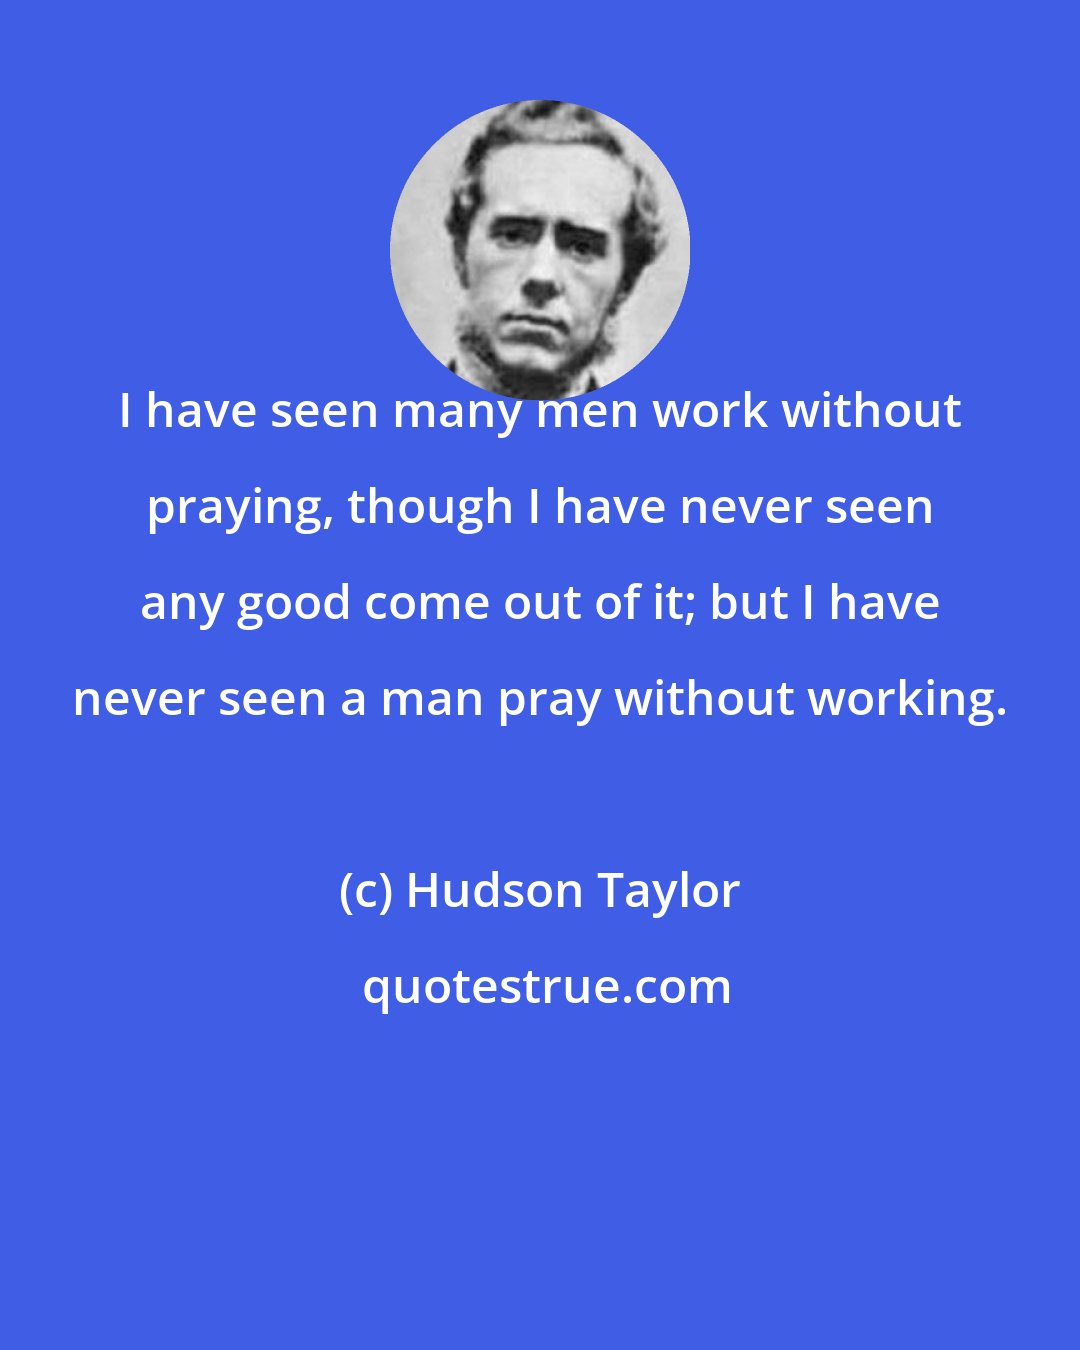 Hudson Taylor: I have seen many men work without praying, though I have never seen any good come out of it; but I have never seen a man pray without working.